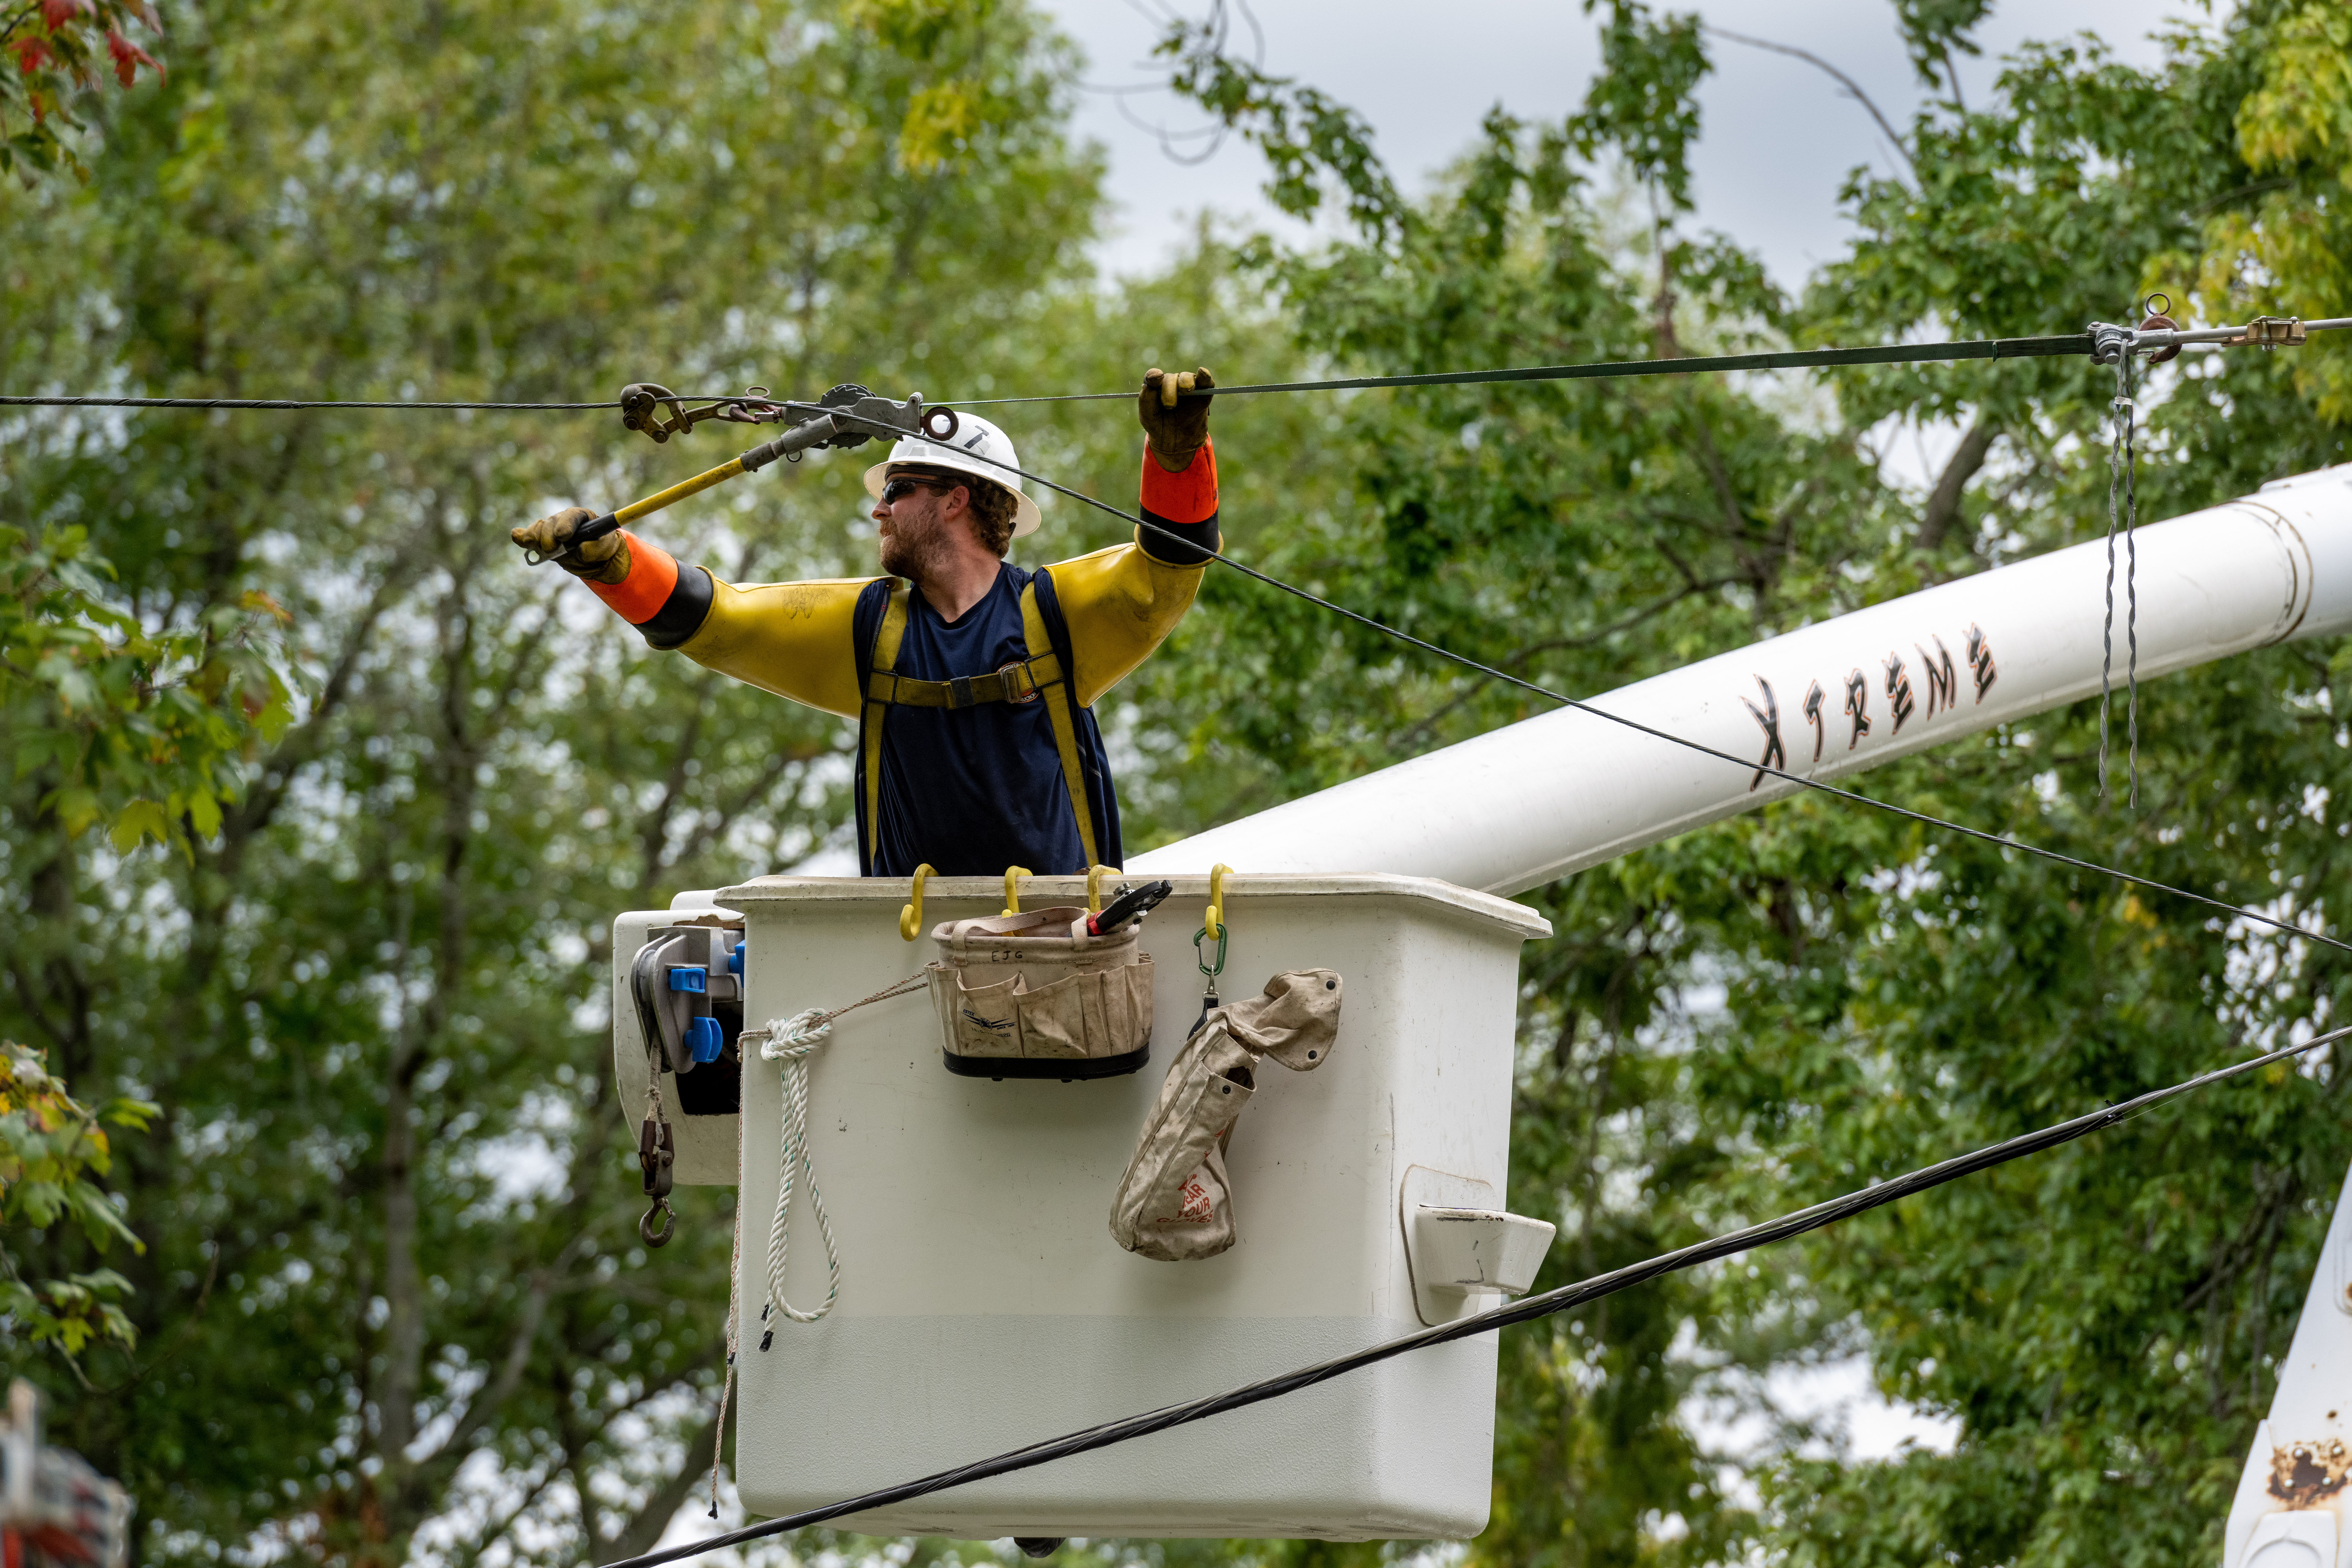 DTE Energy improving reliability by investing over $1B in capital improvement projects